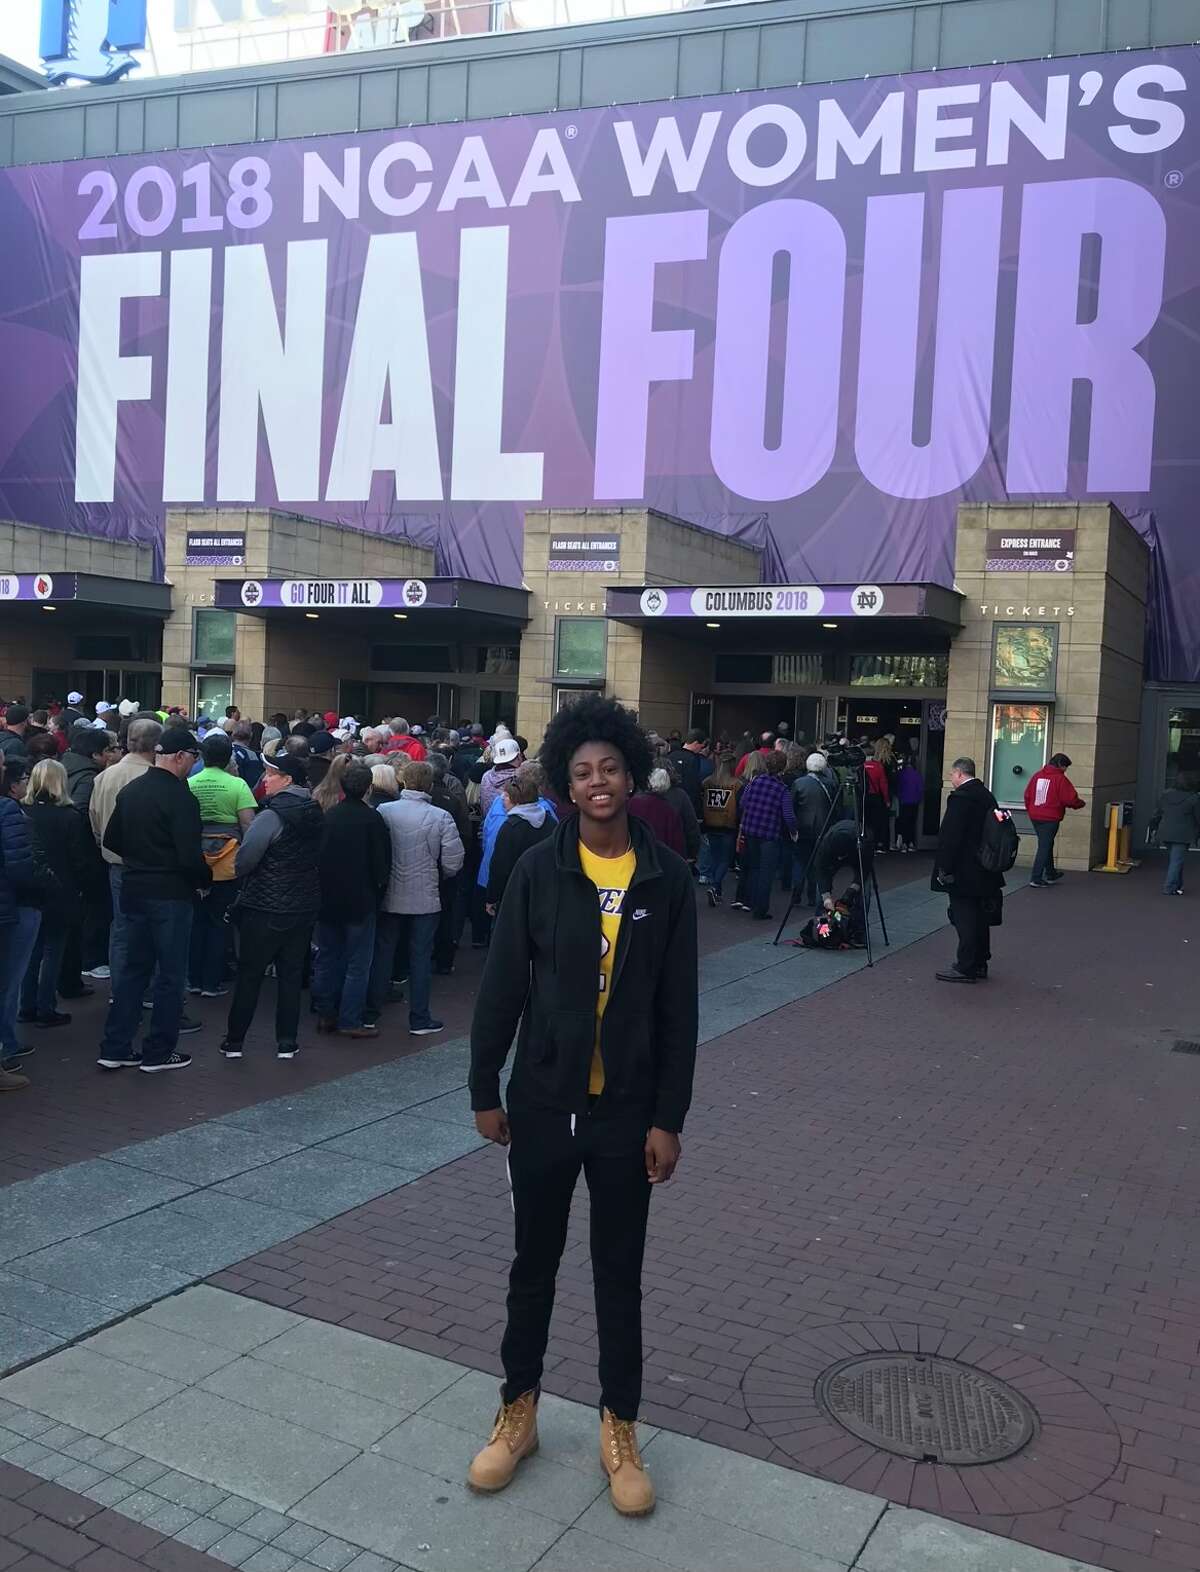 Ayanna Patterson at the 2018 NCAA women's basketball Final Four at at Nationwide Arena in Columbus, Ohio. Notre Dame won its second title by defeating UConn, 91-89, in overtime during the national semifinals.